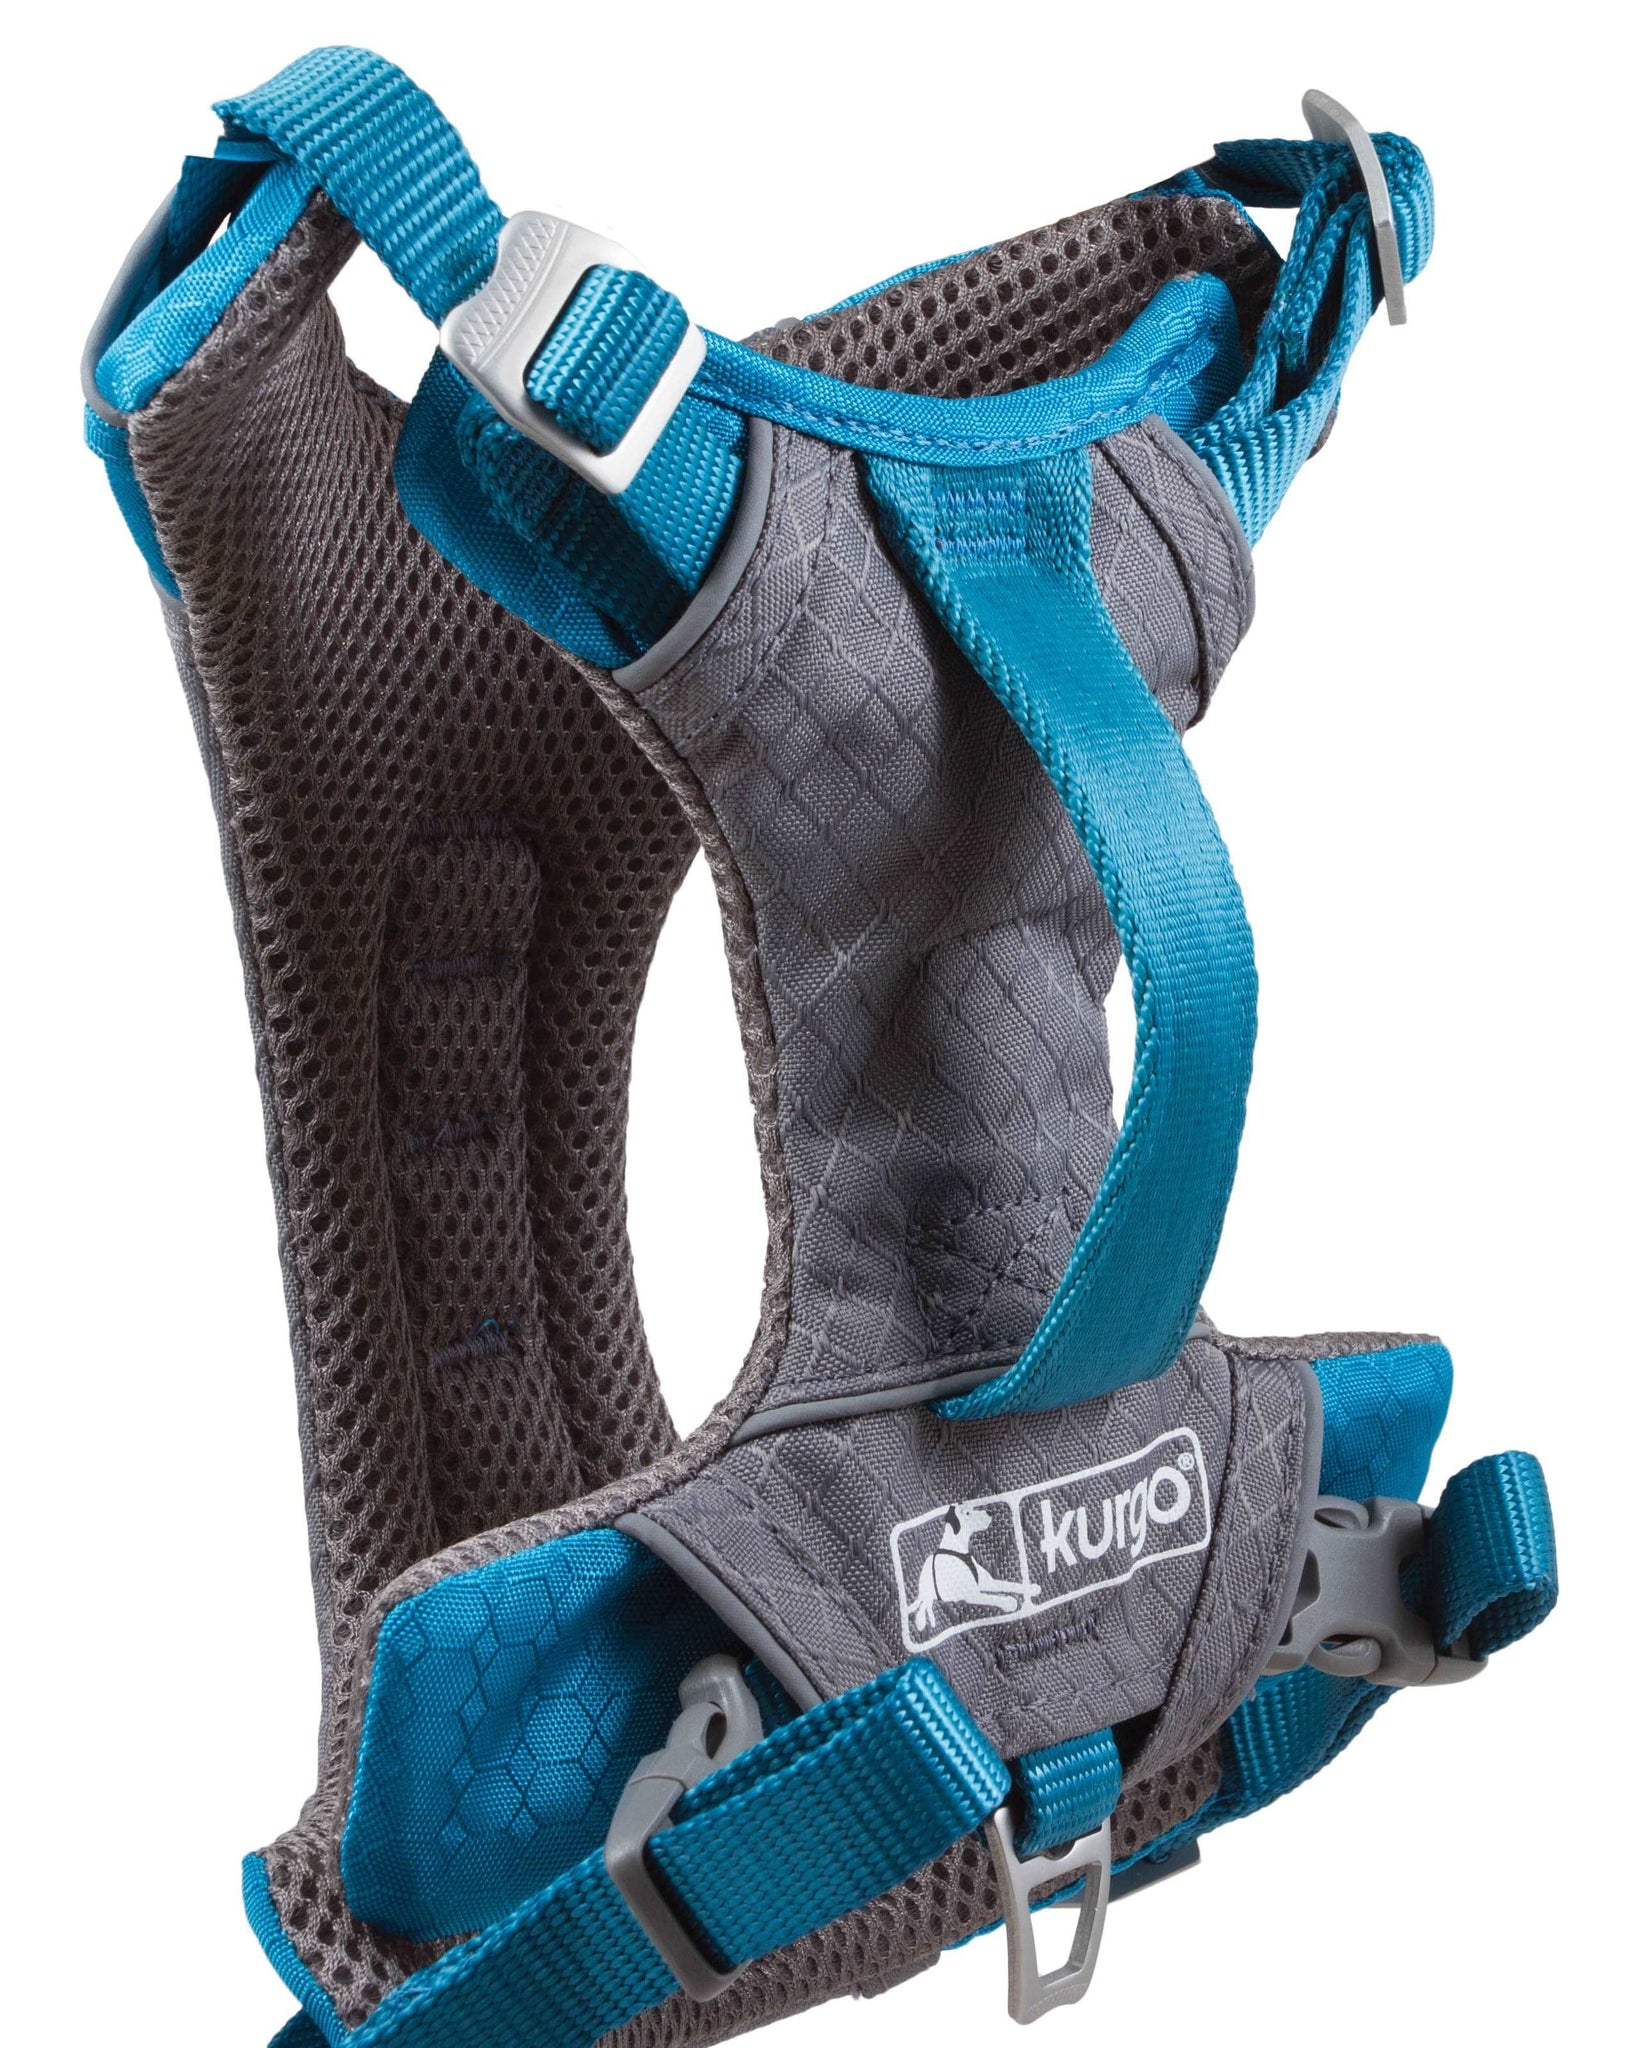 All the adjustable fixings and buckles for the Kurgo Journey Air Harness.